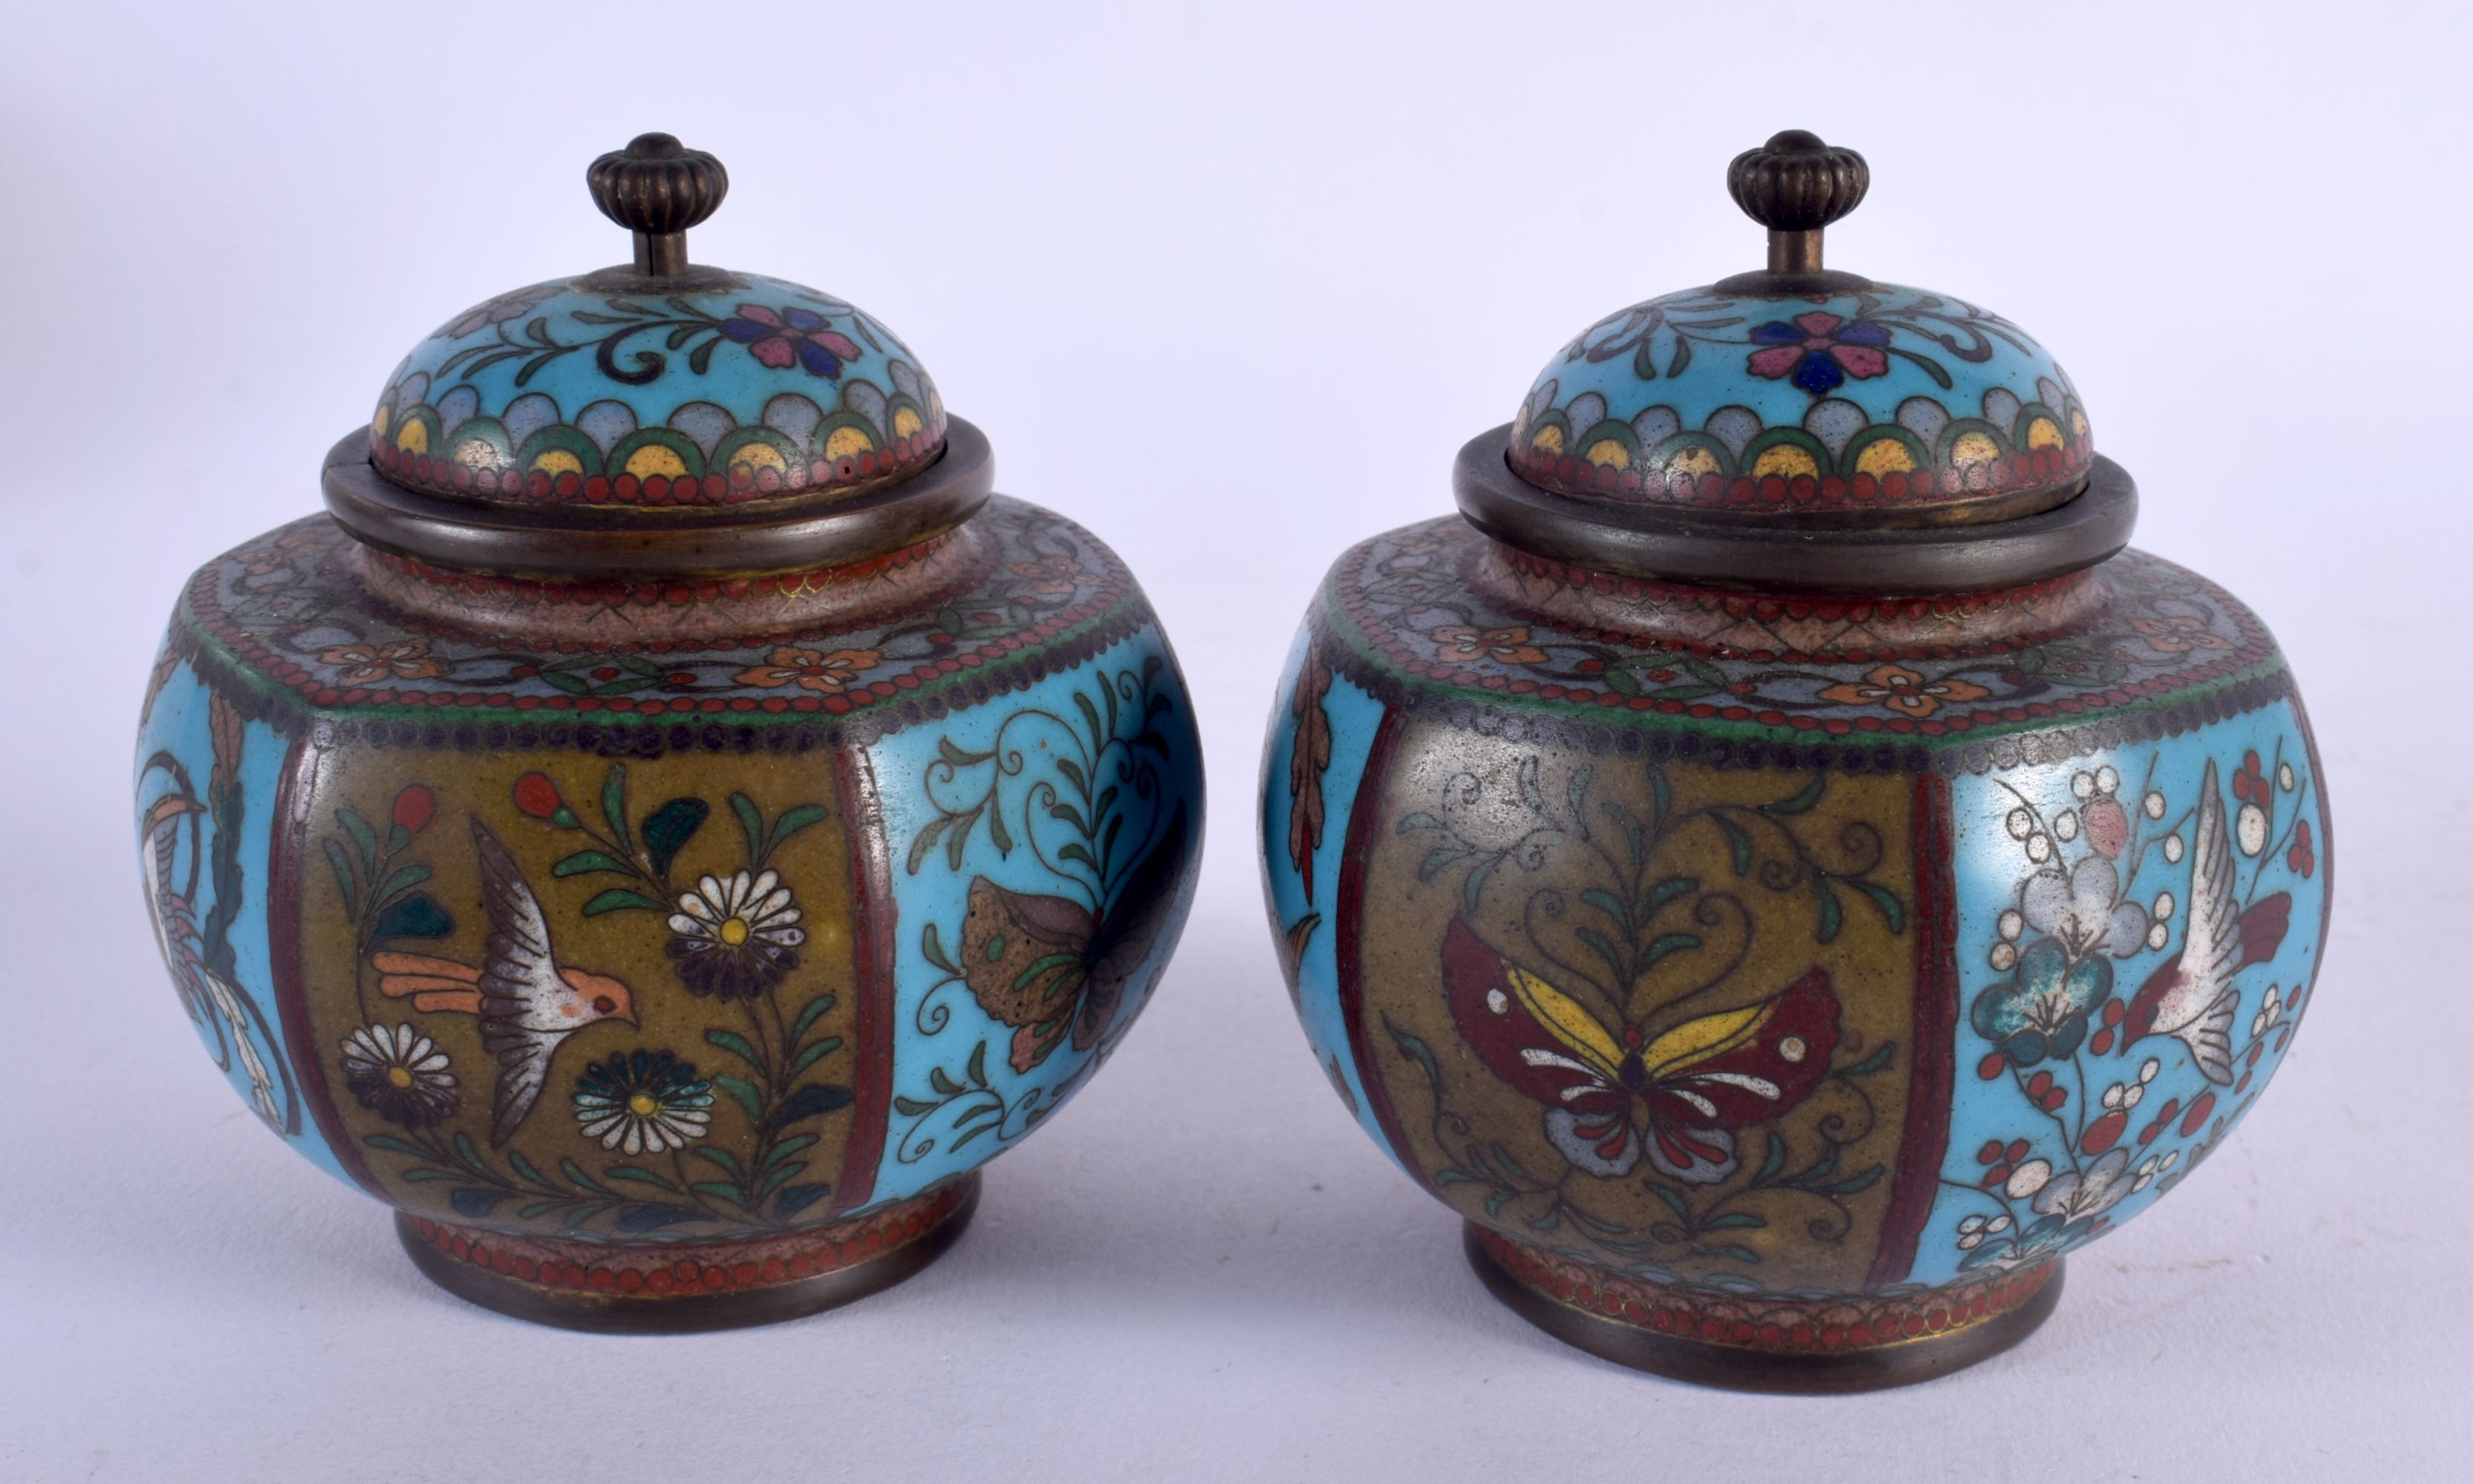 A PAIR OF 19TH CENTURY JAPANESE MEIJI PERIOD CLOISONNE ENAMEL JARS AND COVERS decorated with insects - Image 3 of 5